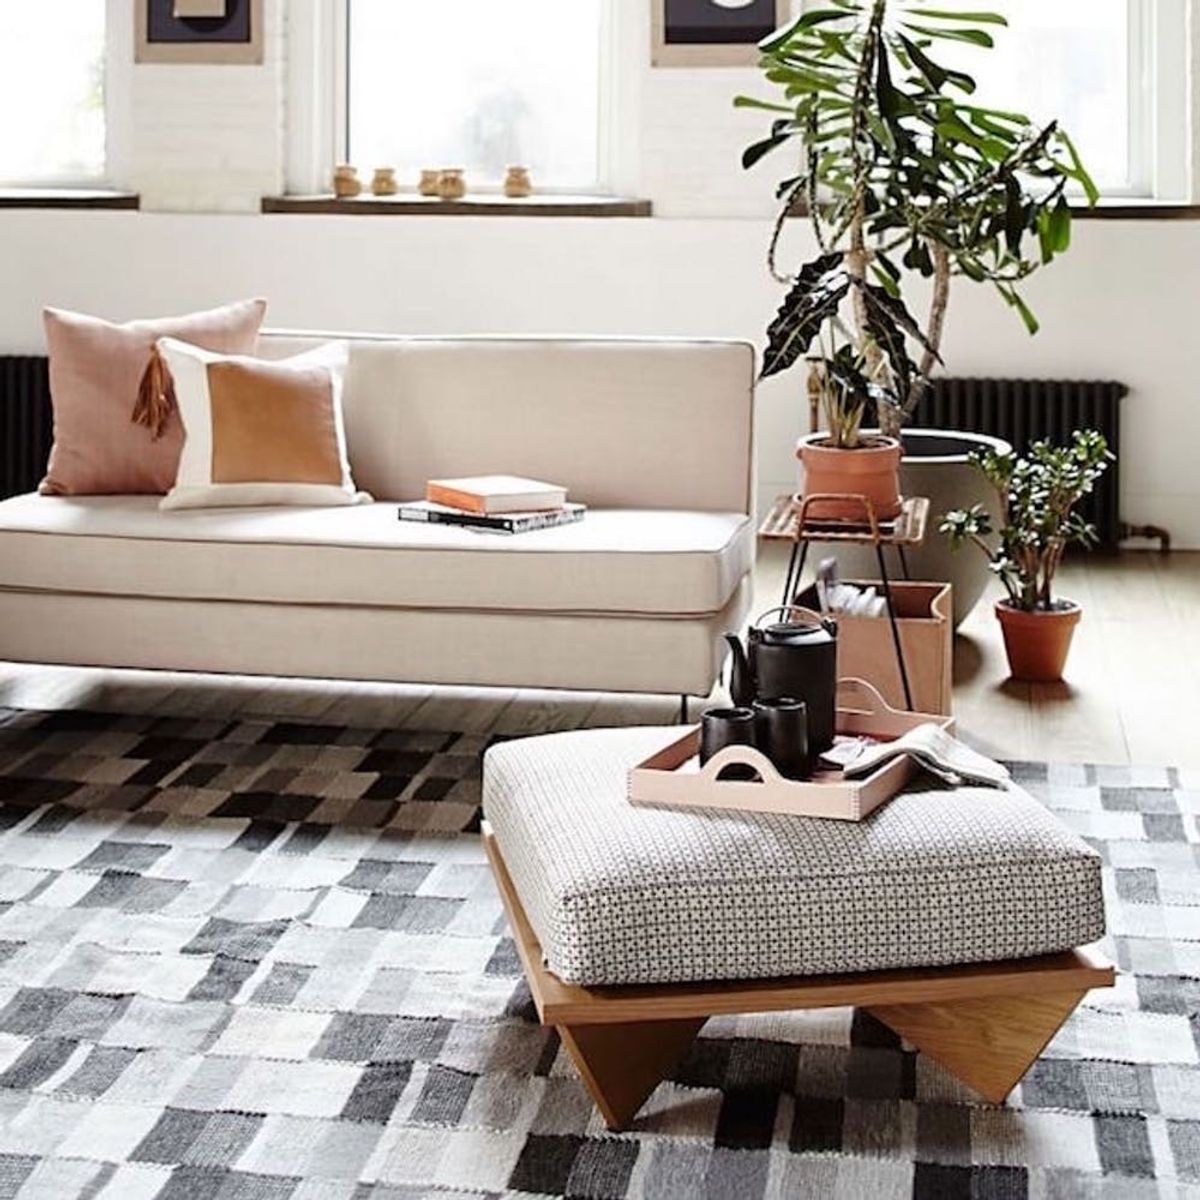 This West Elm + Commune Collab Is a Boho-Lover’s Dream Come True